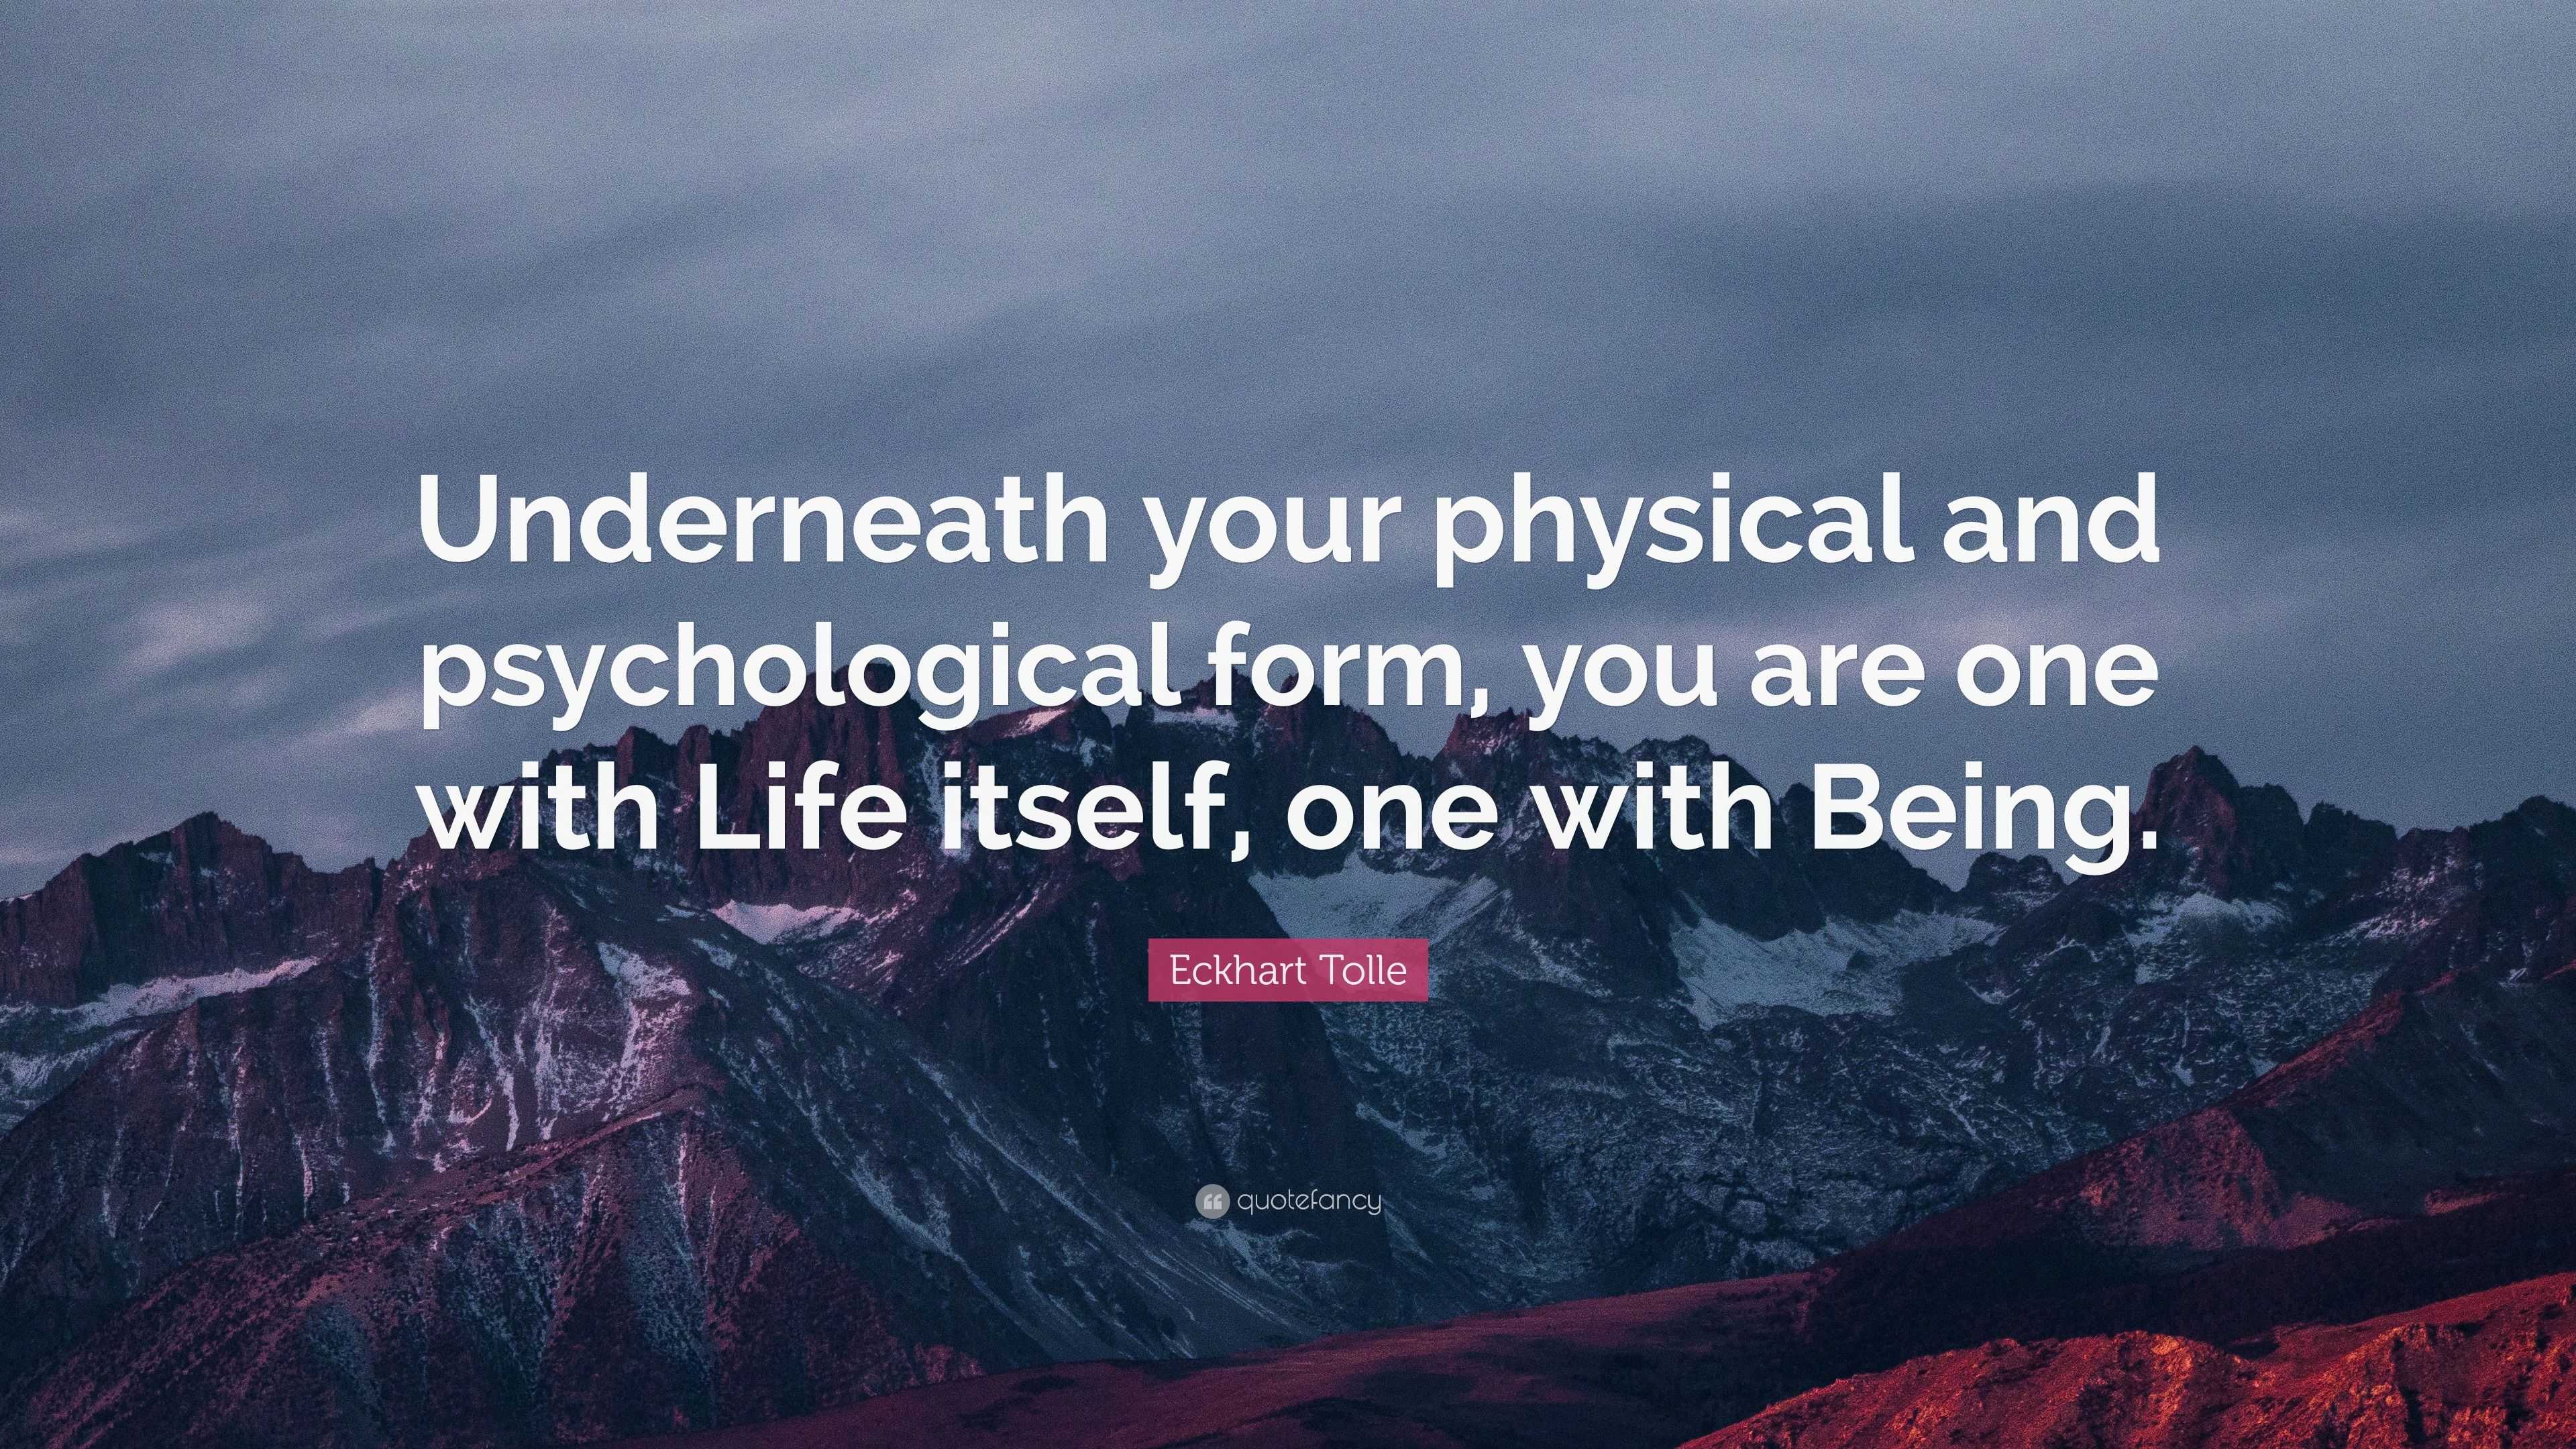 Eckhart Tolle Quote: “Underneath your physical and psychological form ...